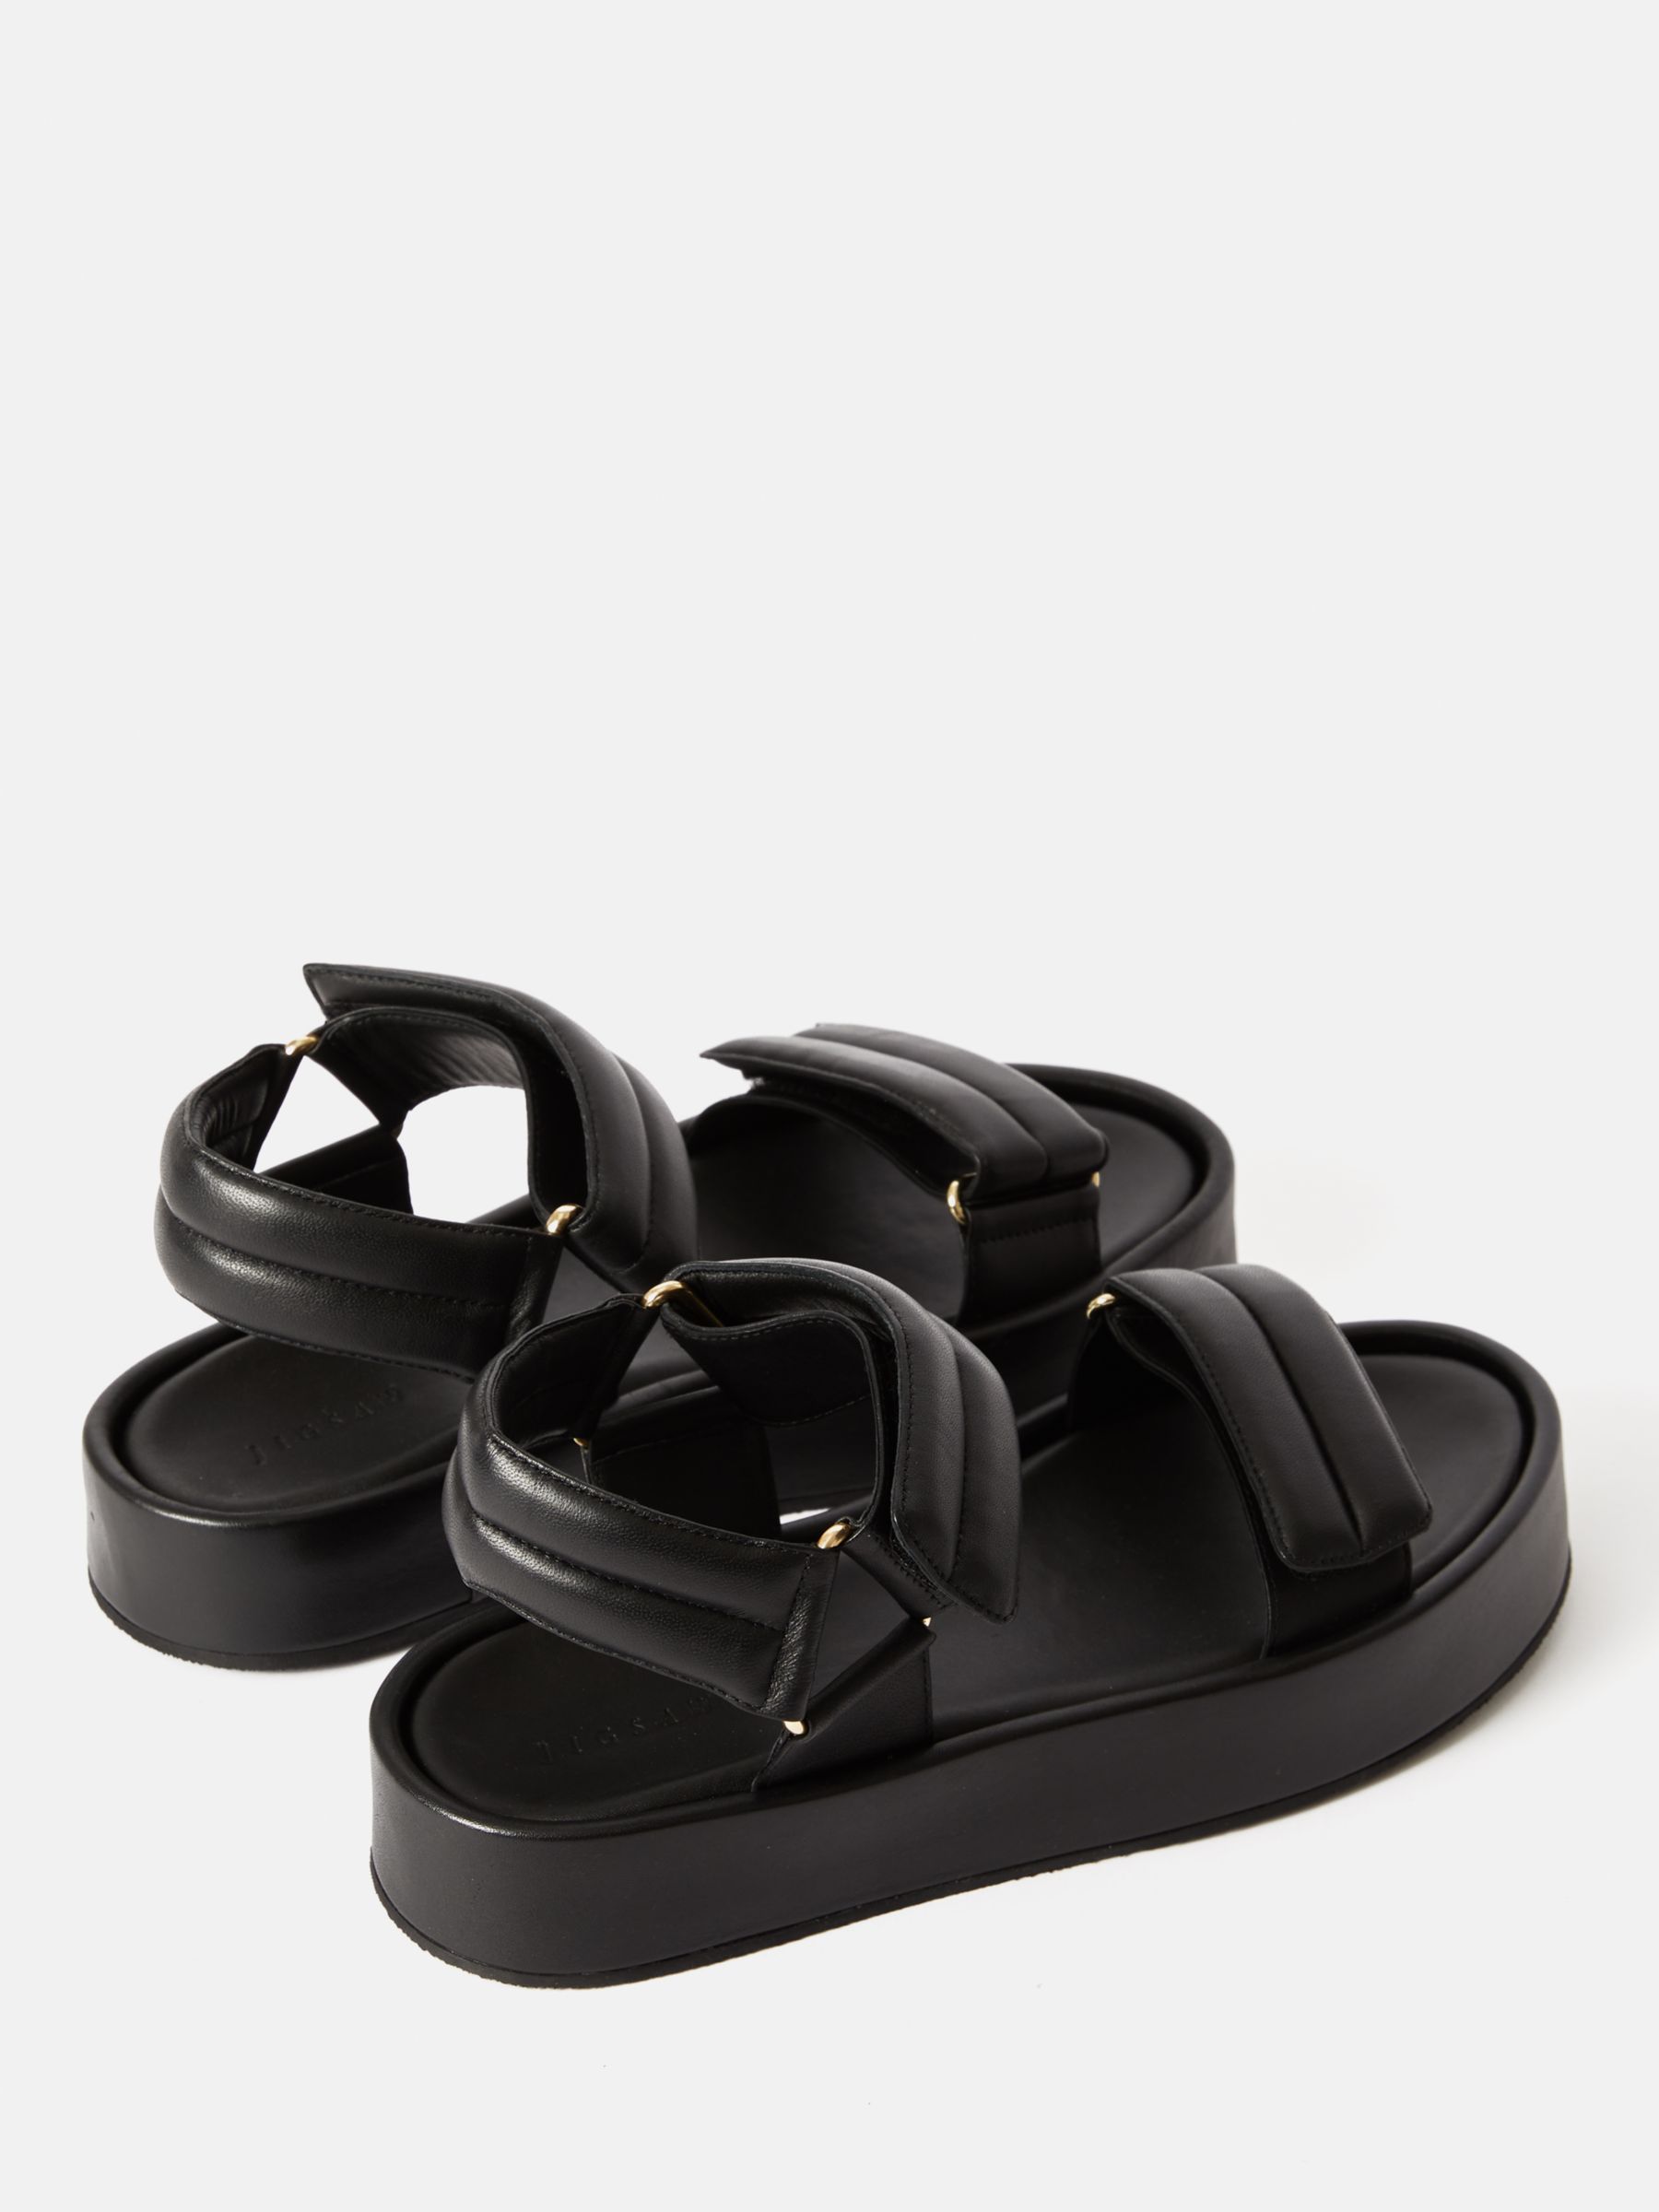 Jigsaw Raquel Leather Footbed Sandals, Black at John Lewis & Partners